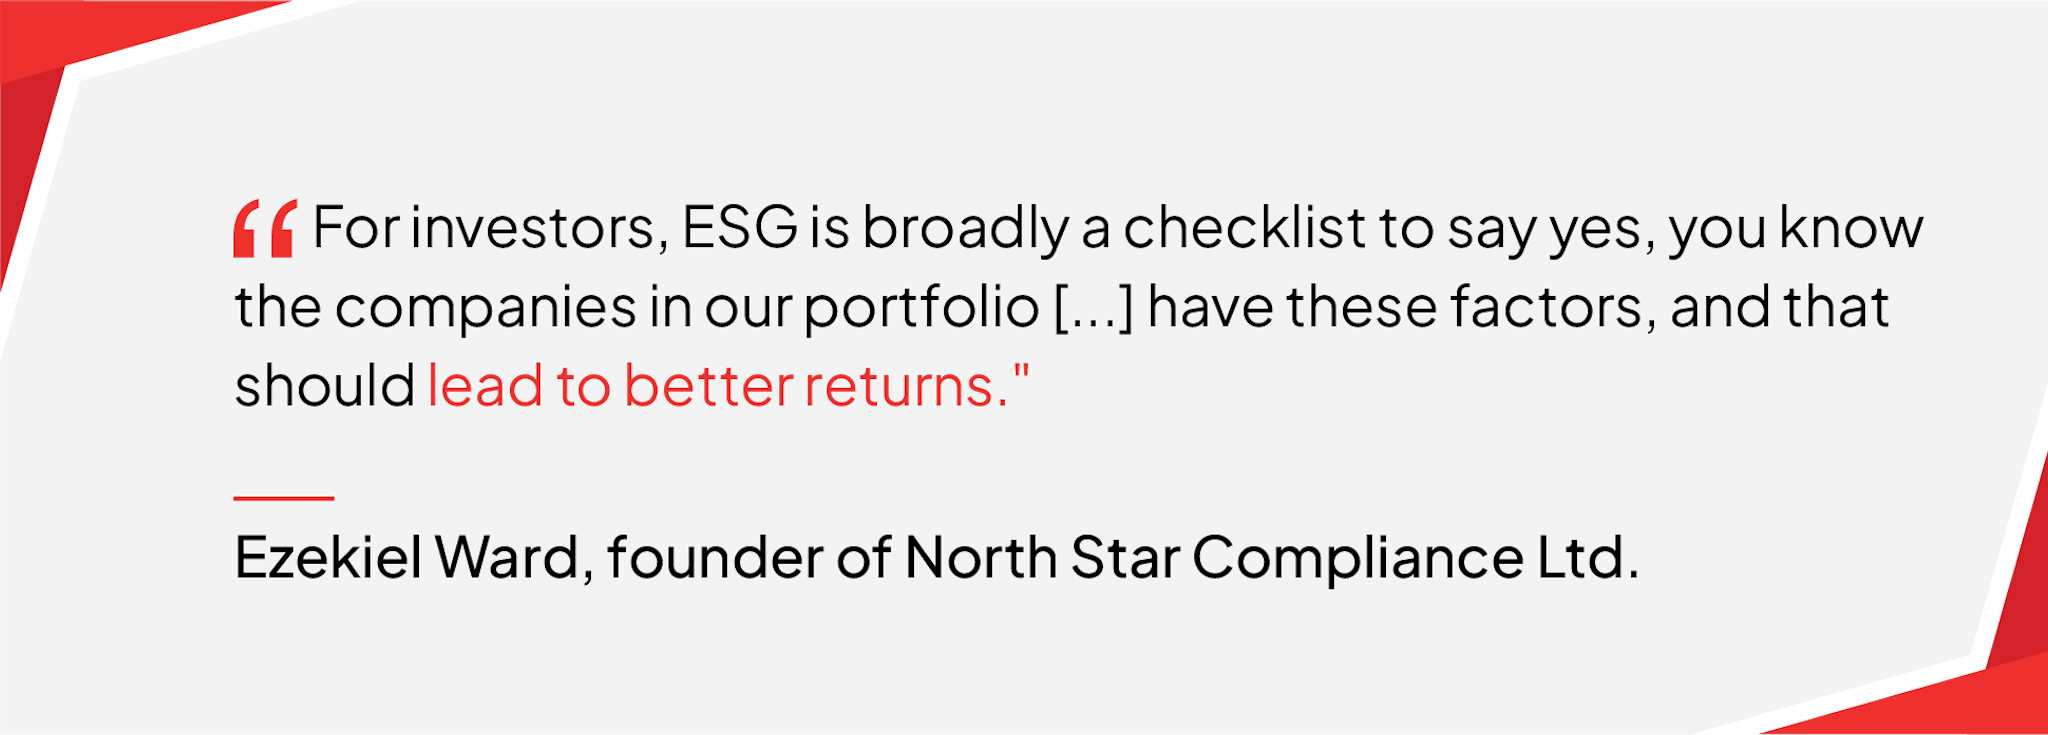 For investors, ESG is broadly a checklist to say yes, you know the companies in our portfolio […] have these factors, and that should lead to better returns. - Quote from Ezekiel Ward, the founder of North Star Compliance Limited	